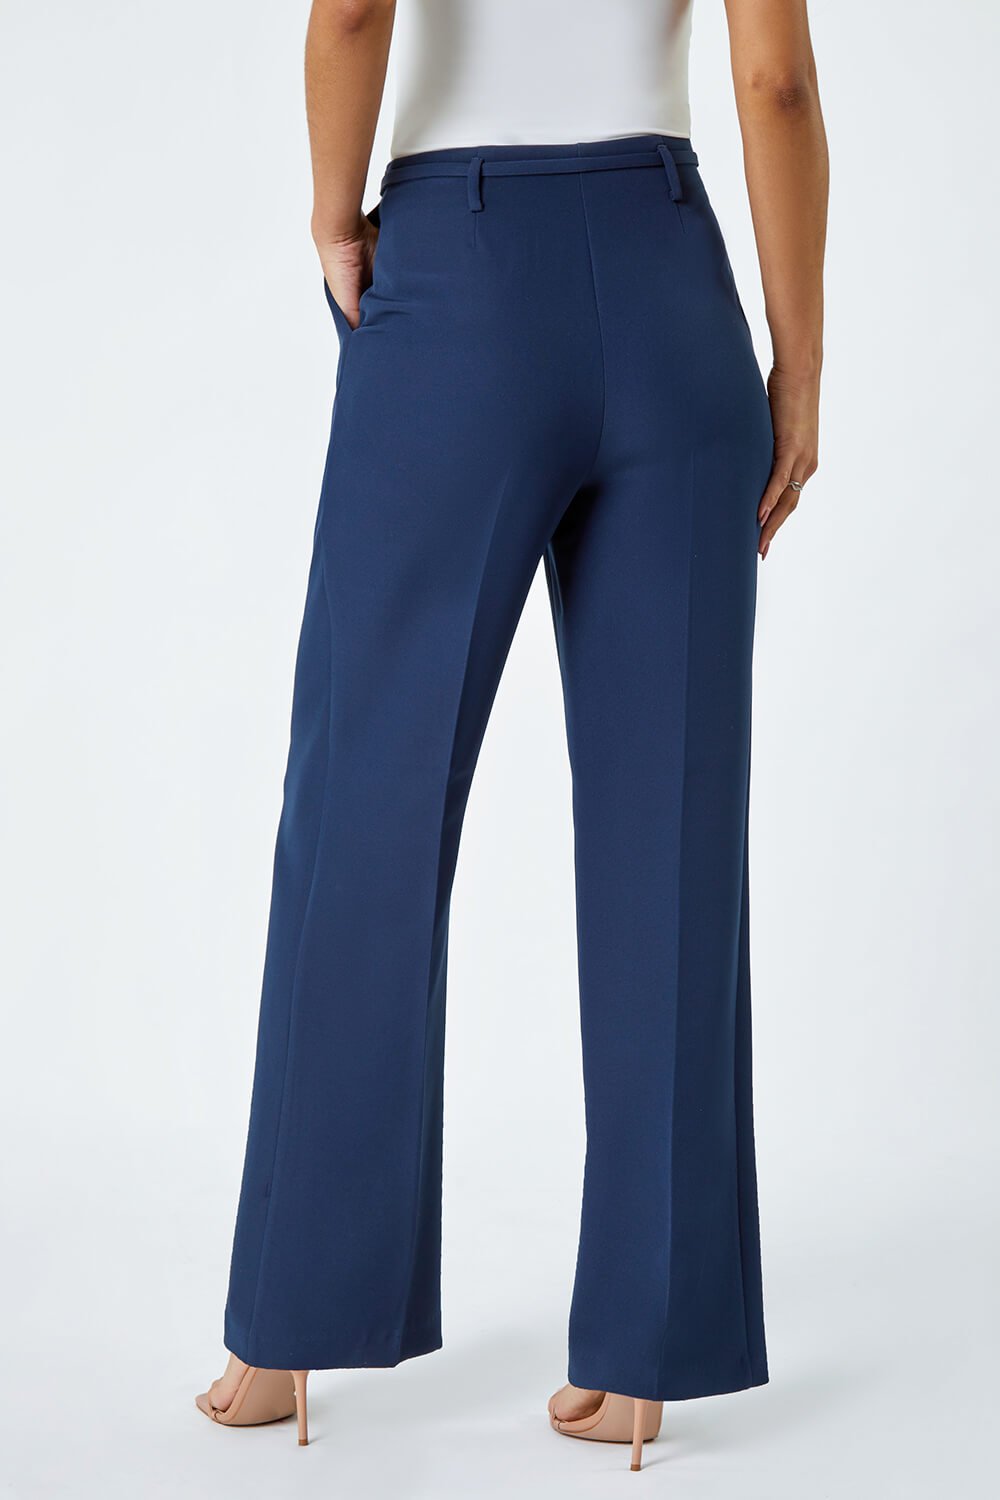 Navy  Crepe Stretch Straight Leg Trousers, Image 3 of 6